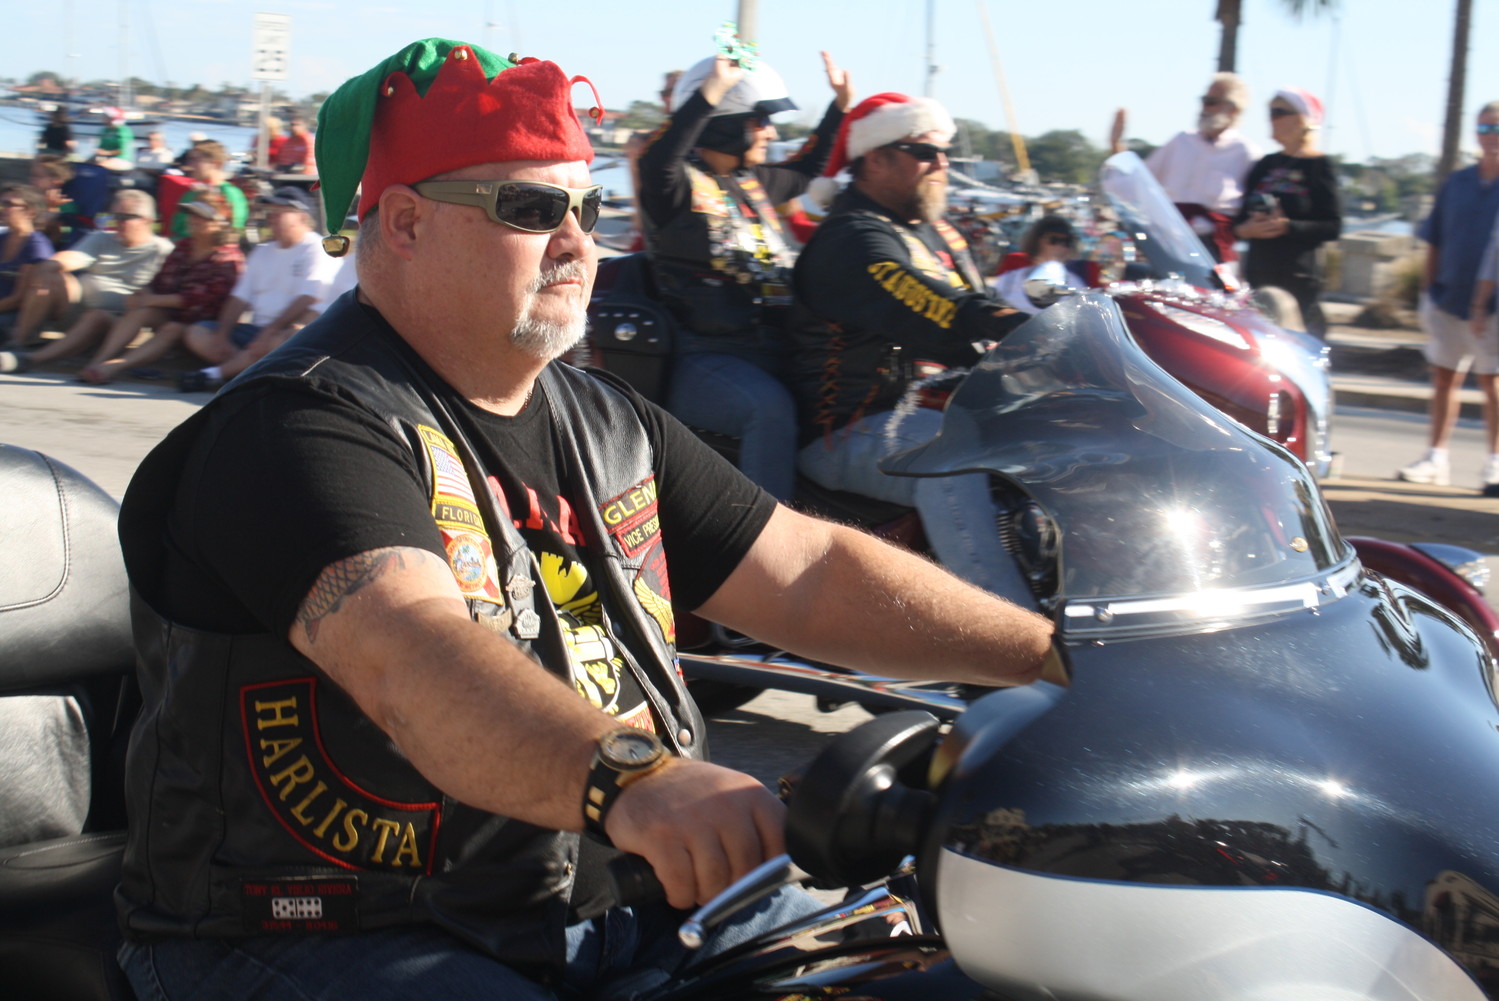 A motorcyclist takes part in the holiday cheer of the St. Augustine Christmas parade.